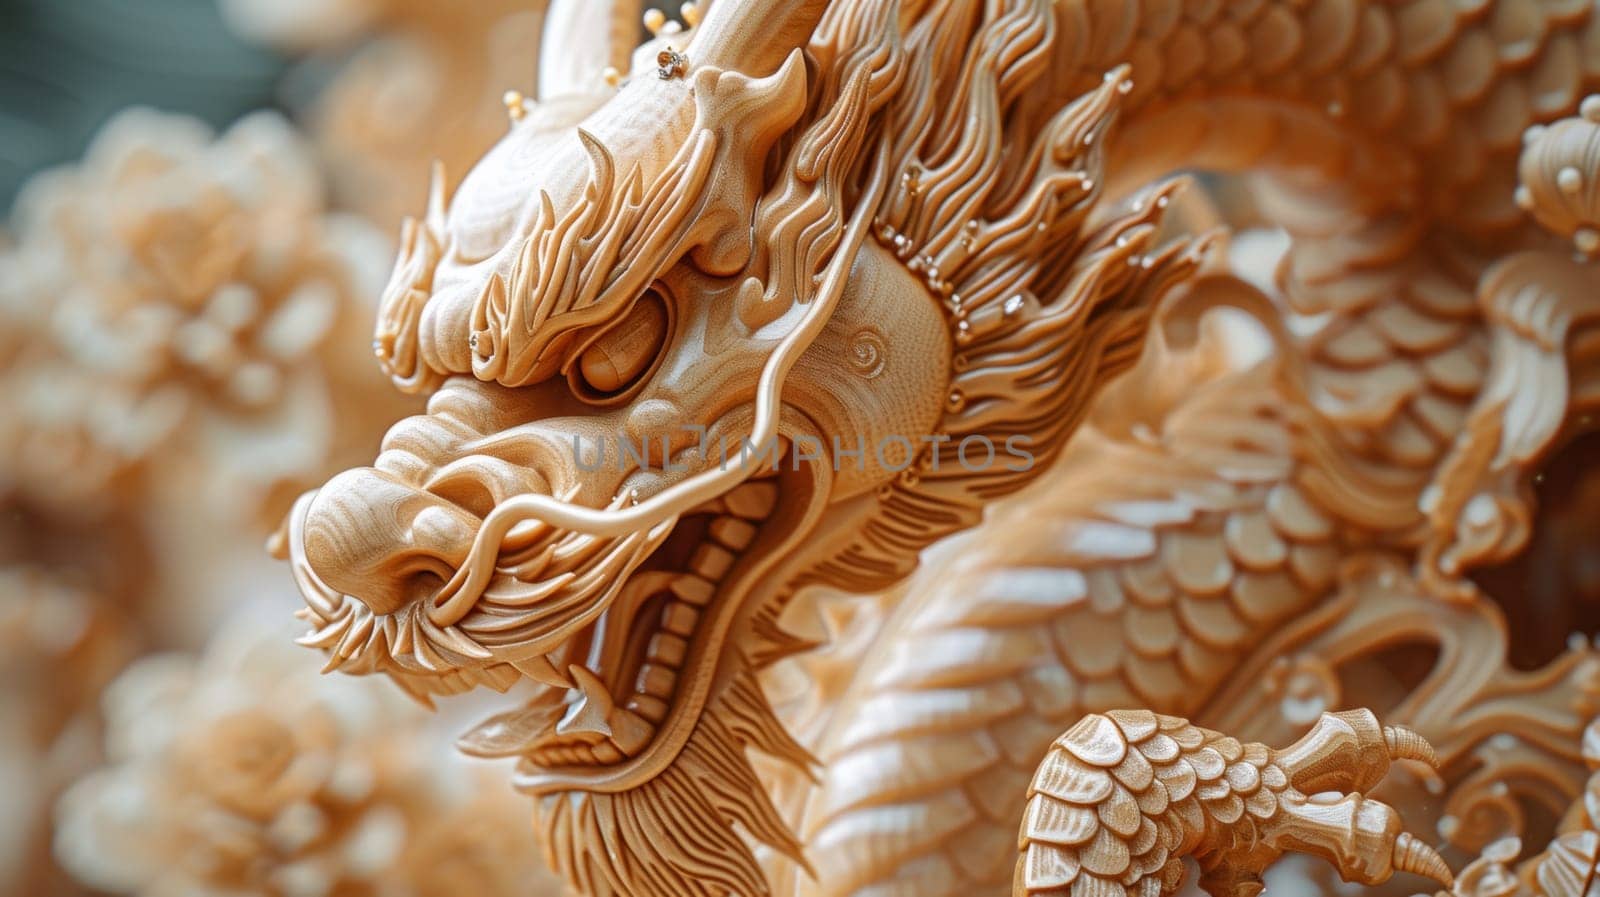 A close up of a carved dragon head on display in an art gallery